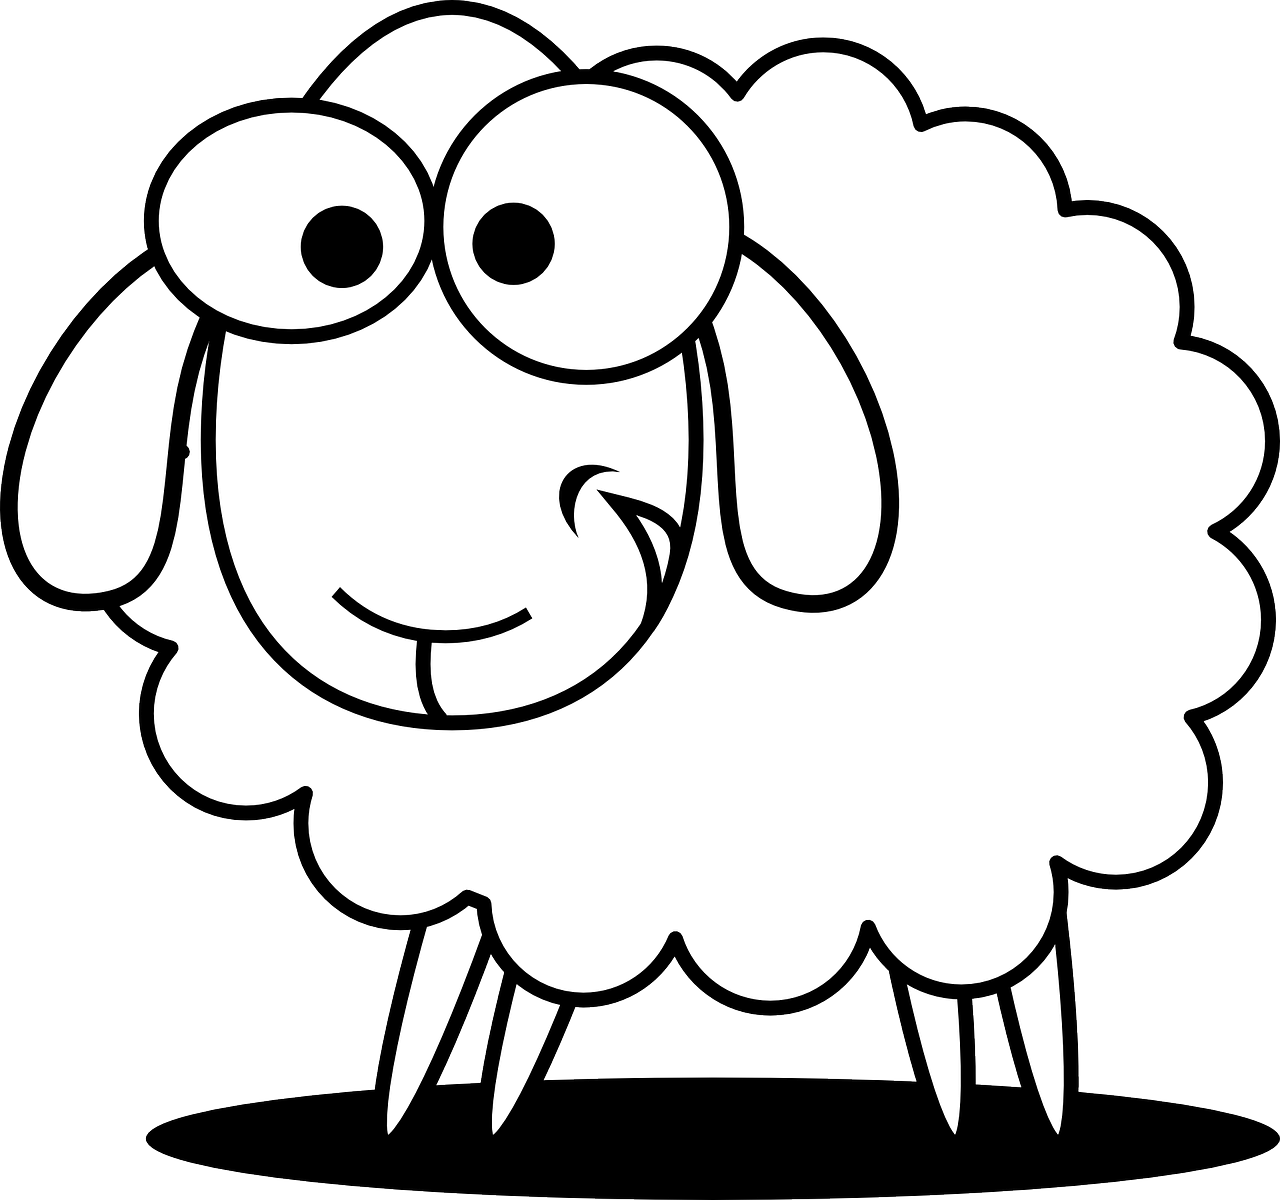 a black and white sheep with big eyes, vector art, pixabay, mingei, high-contrast, of peppa pig, nighttime, fluffy''